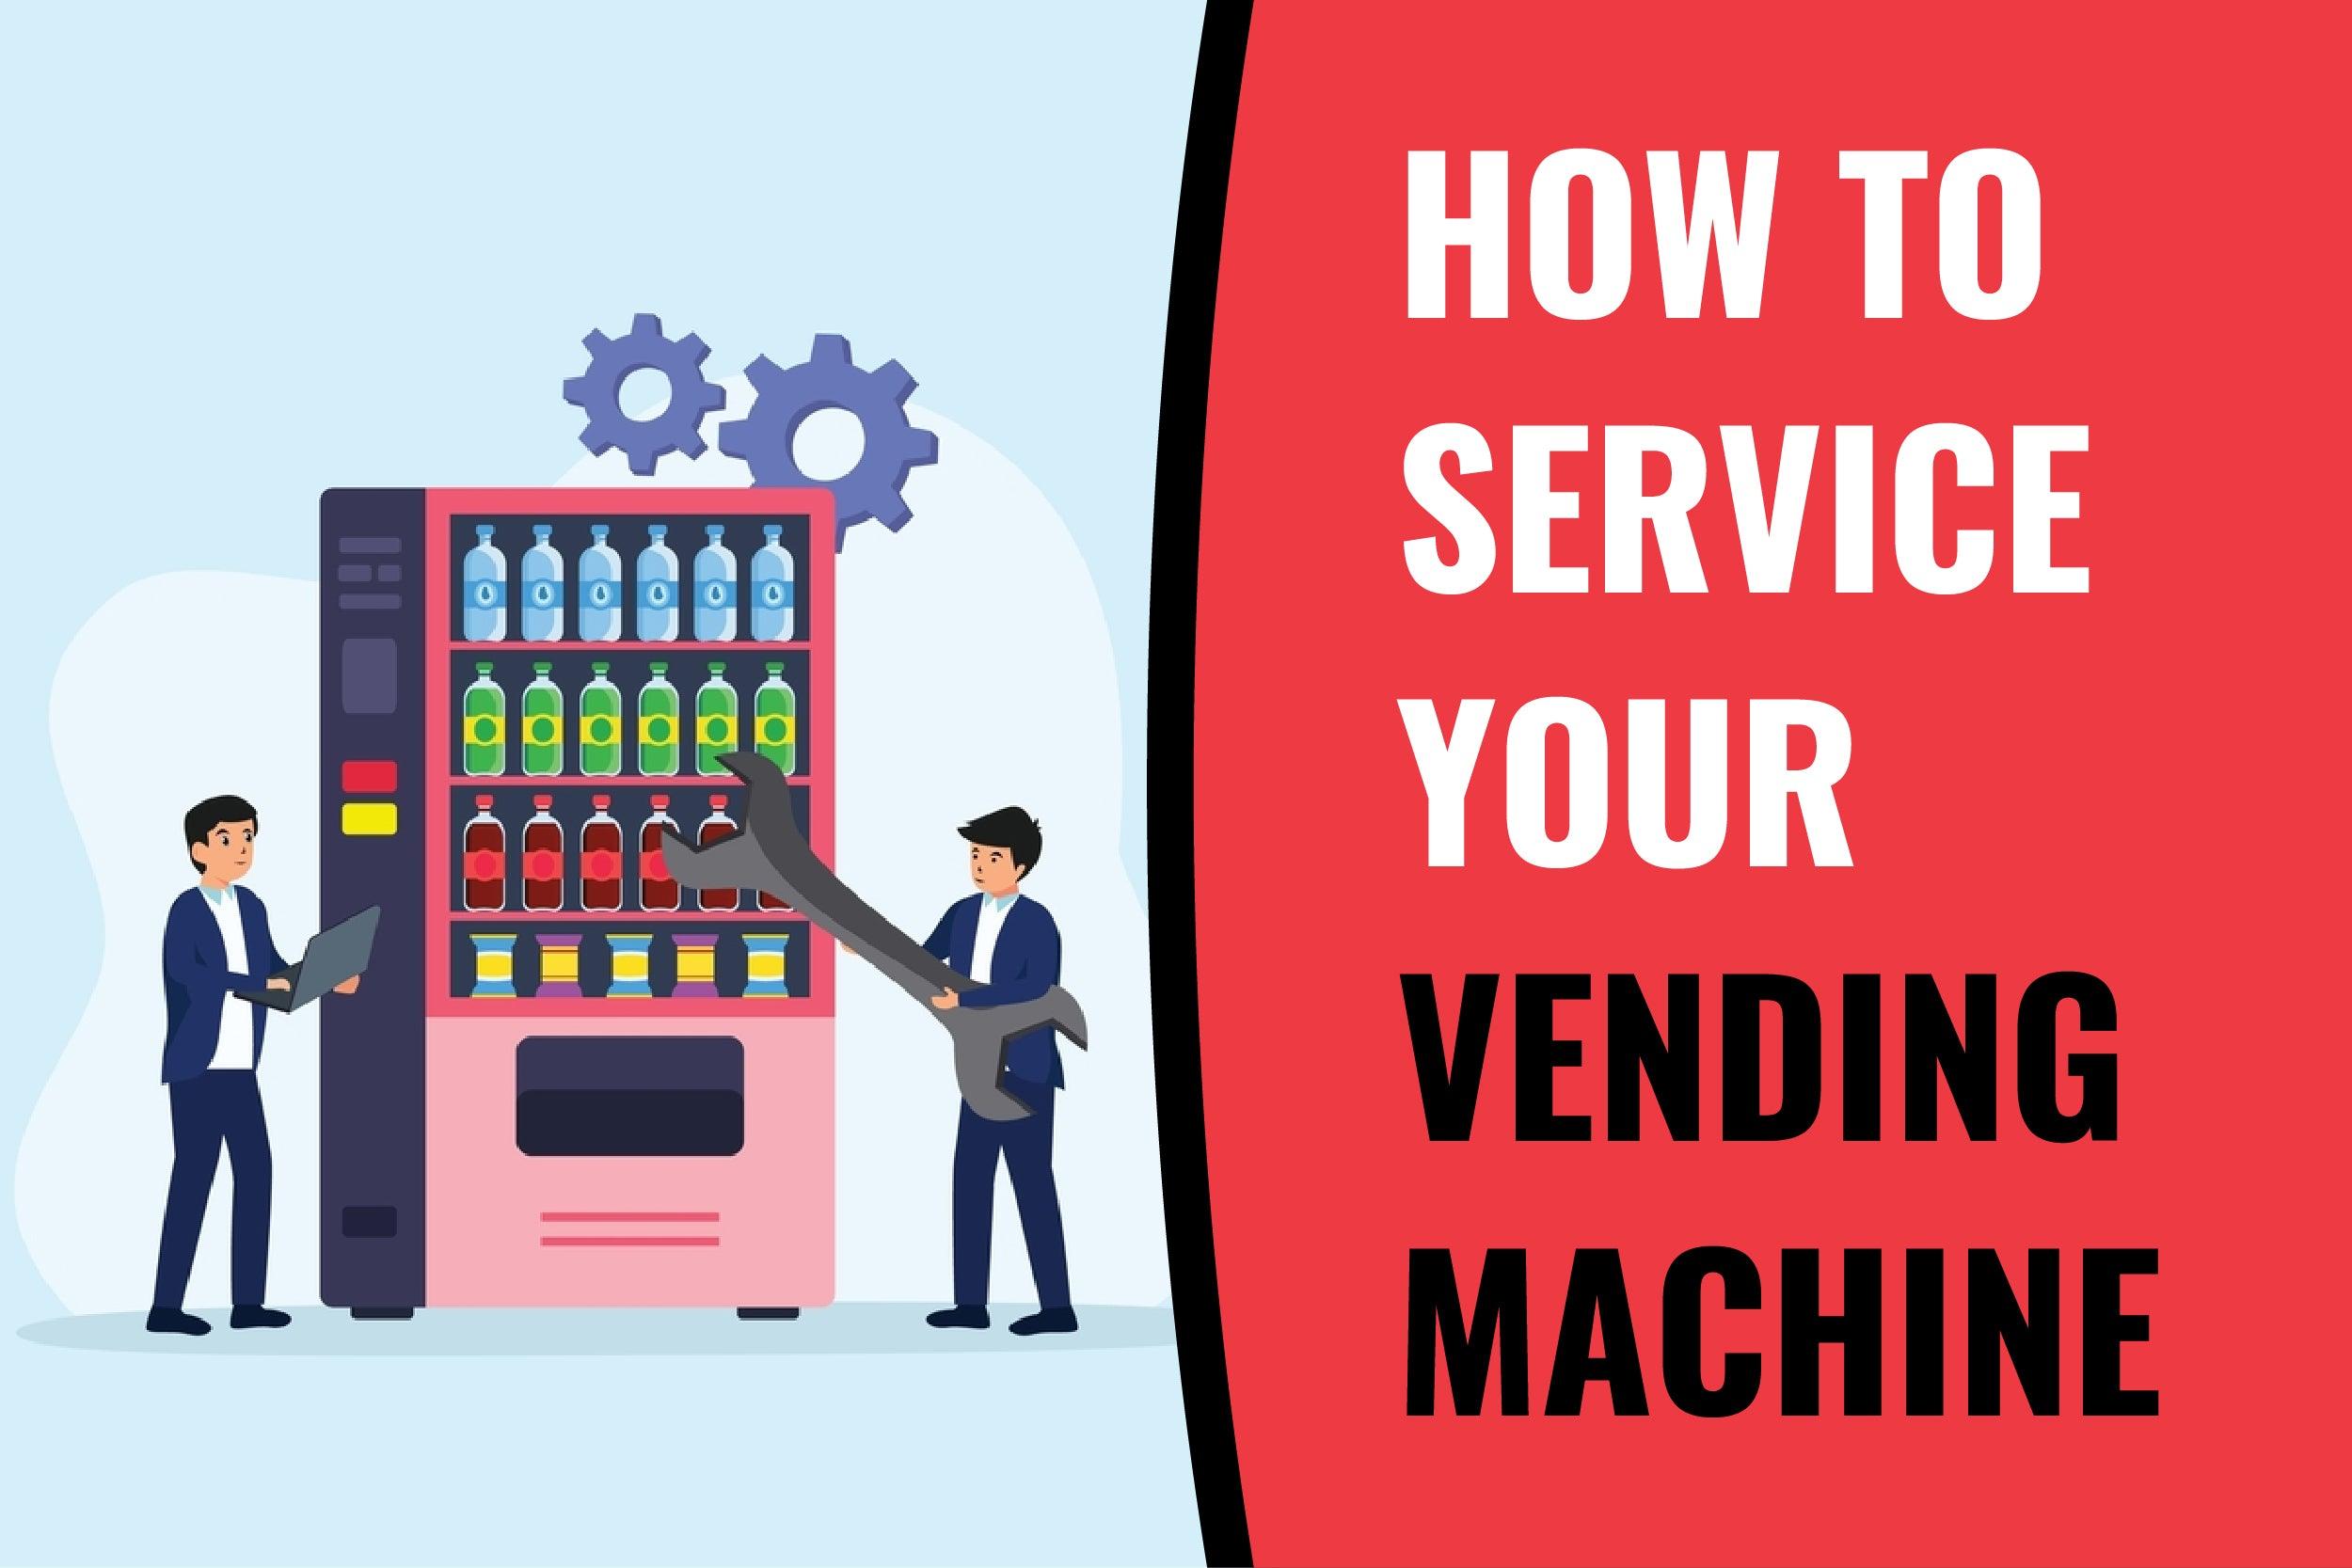 Vending Support: How to Service Your Vending Machine - Vendnet